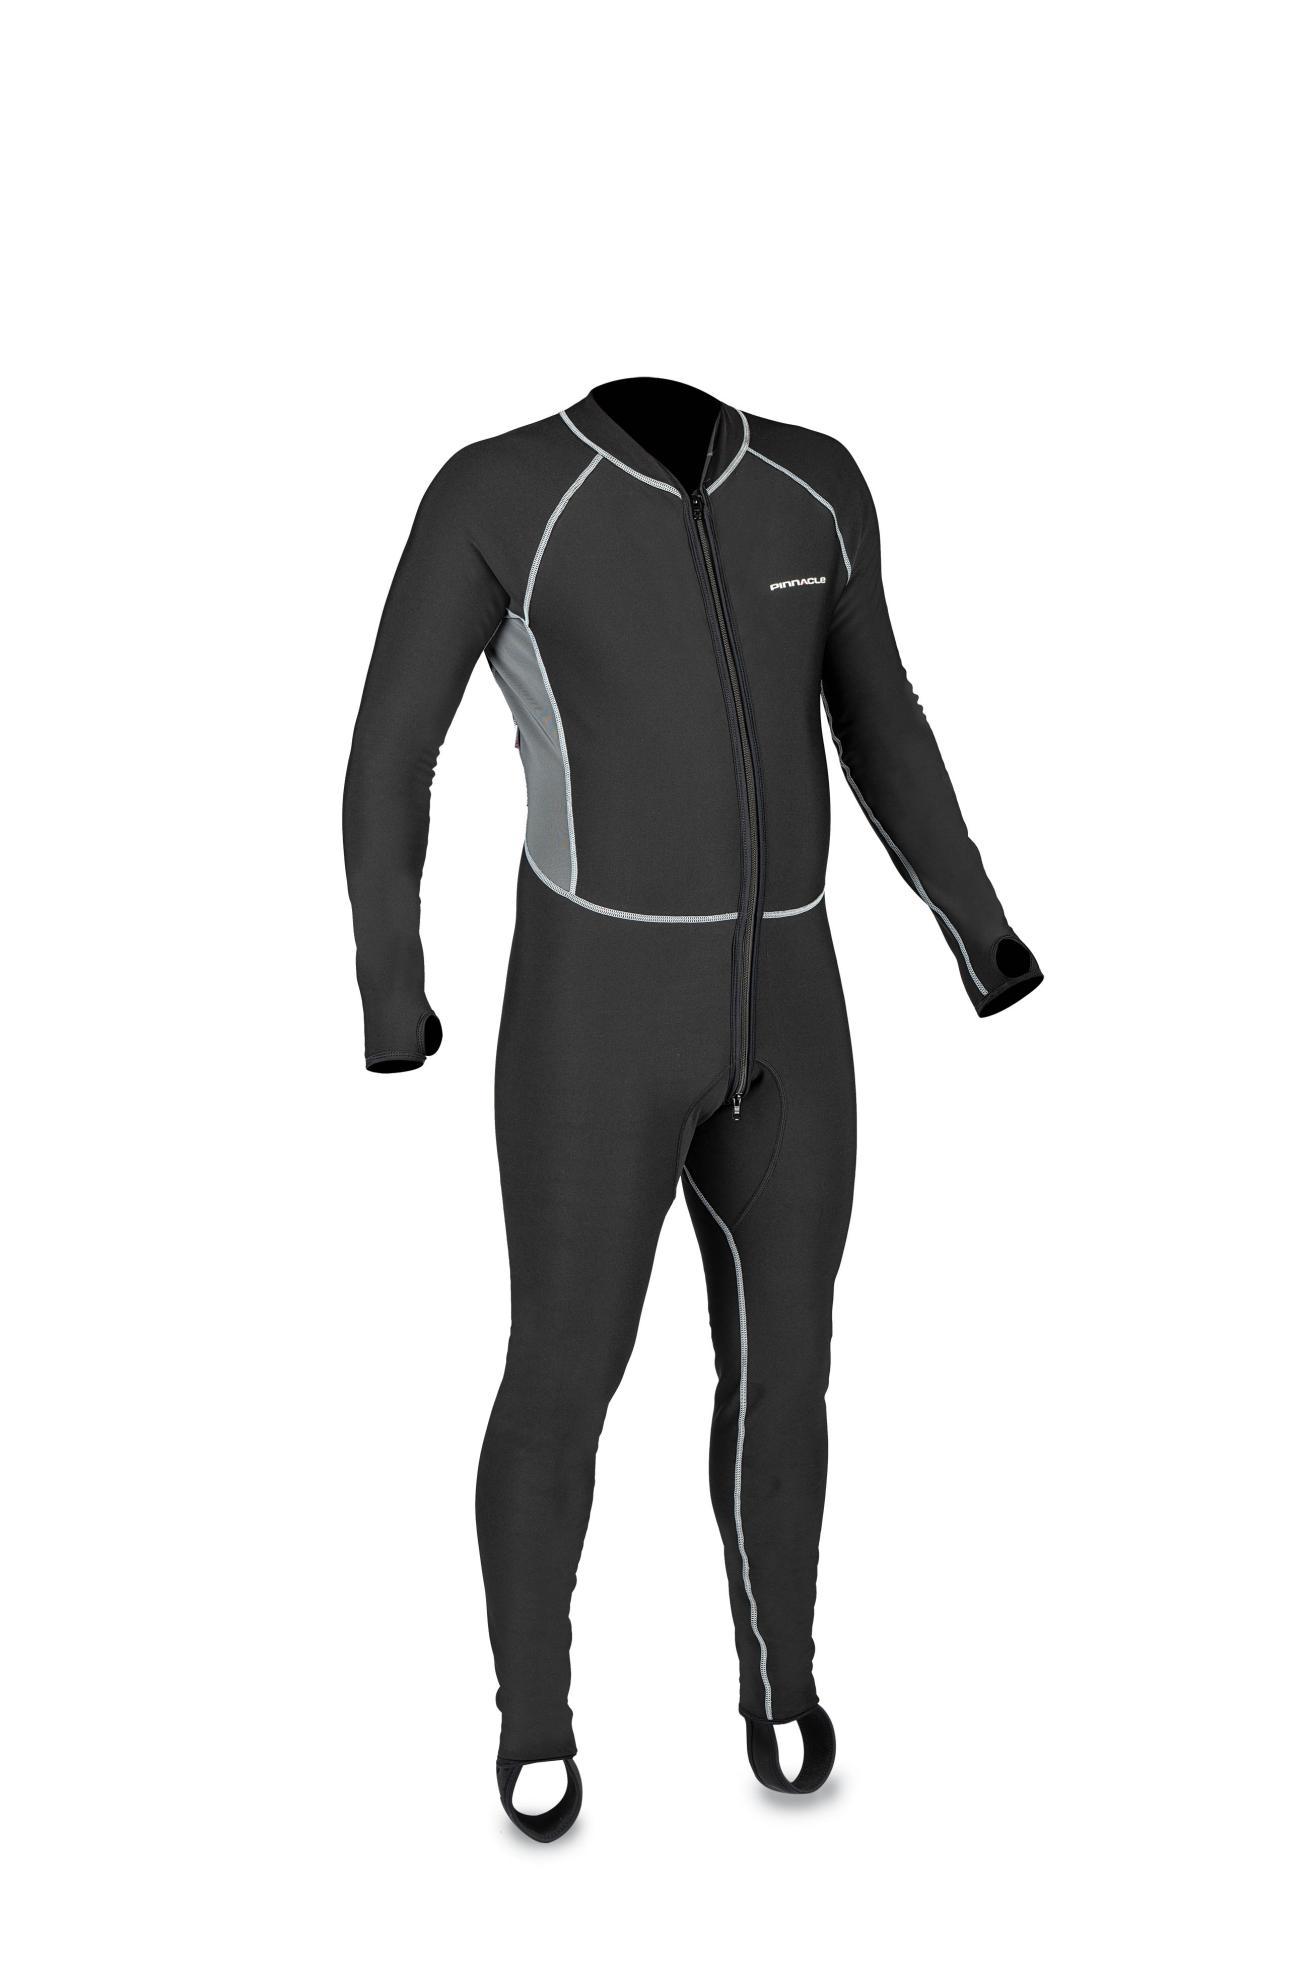 Dive wear for every BODY? Finding the right wetsuit or exposure suit